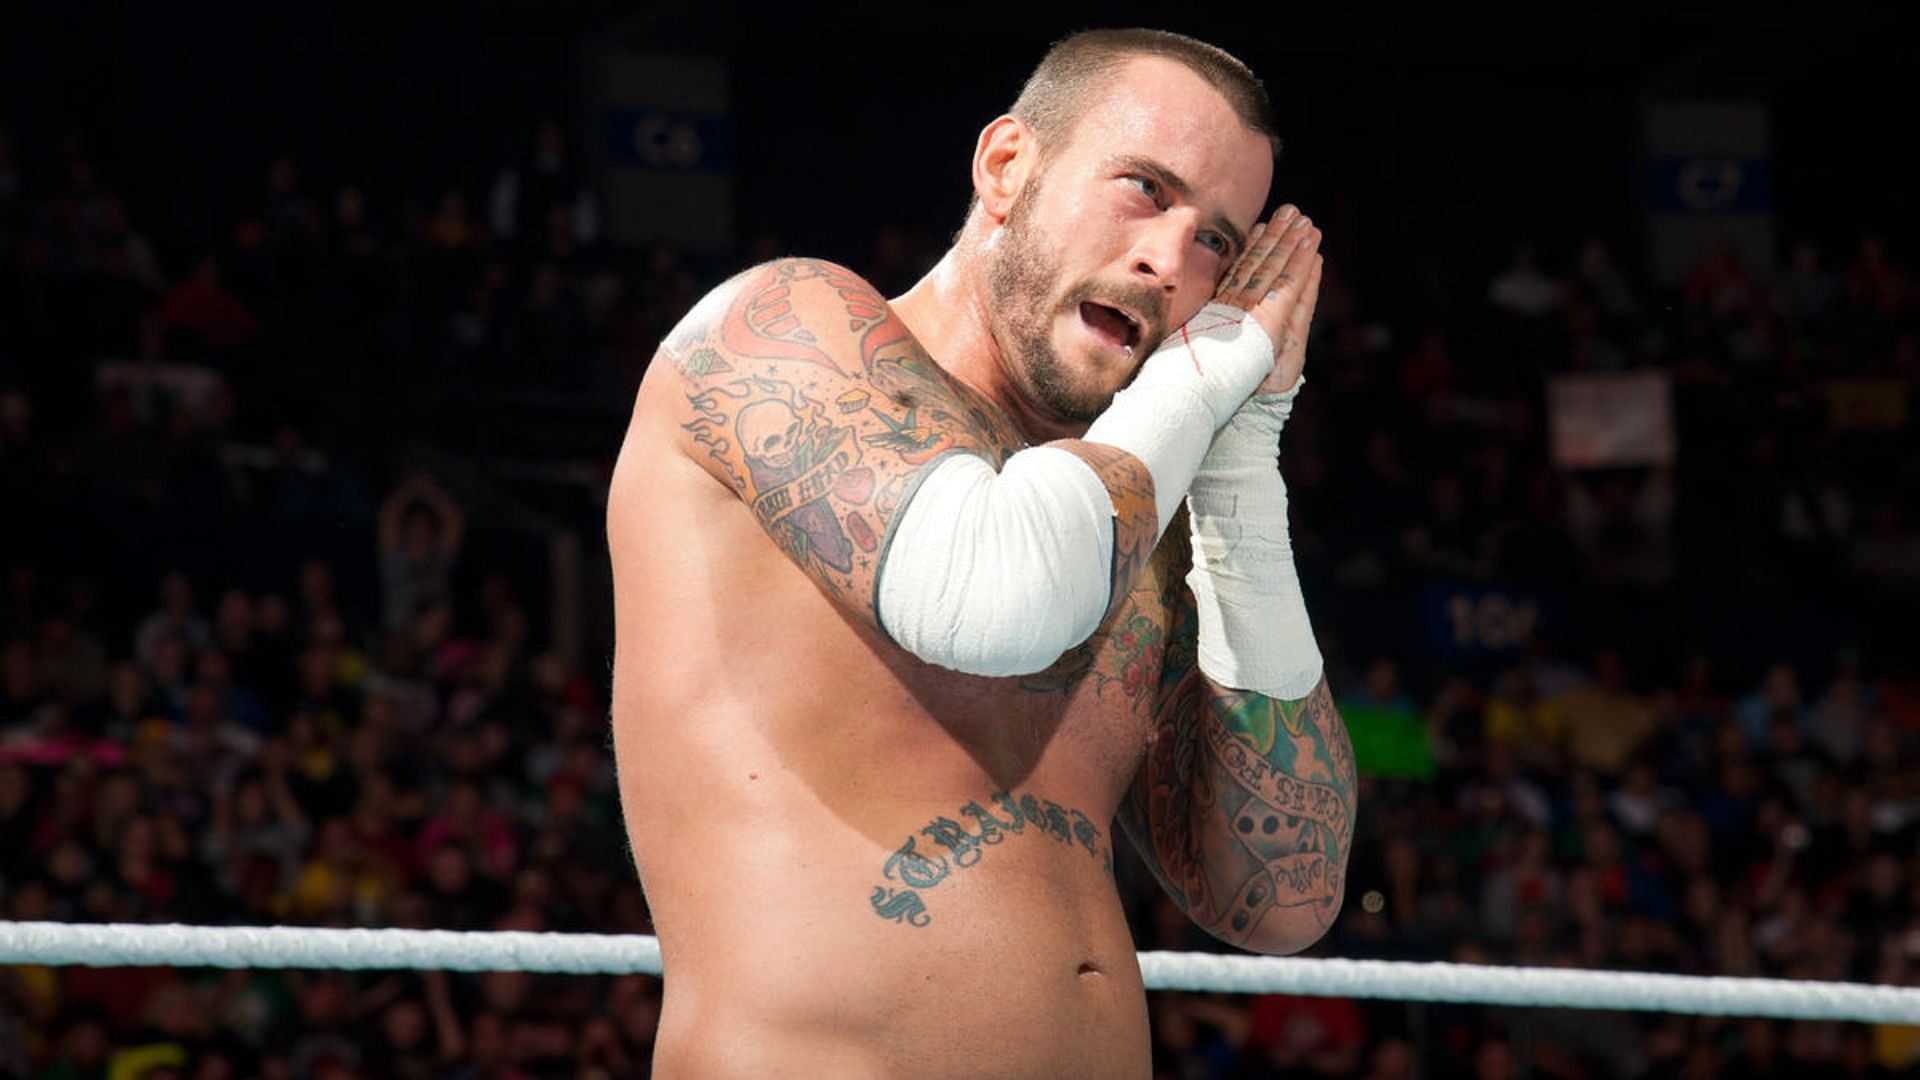 CM Punk to choose Monday on WWE Raw which brand he will sign with - WWE  News, WWE Results, AEW News, AEW Results